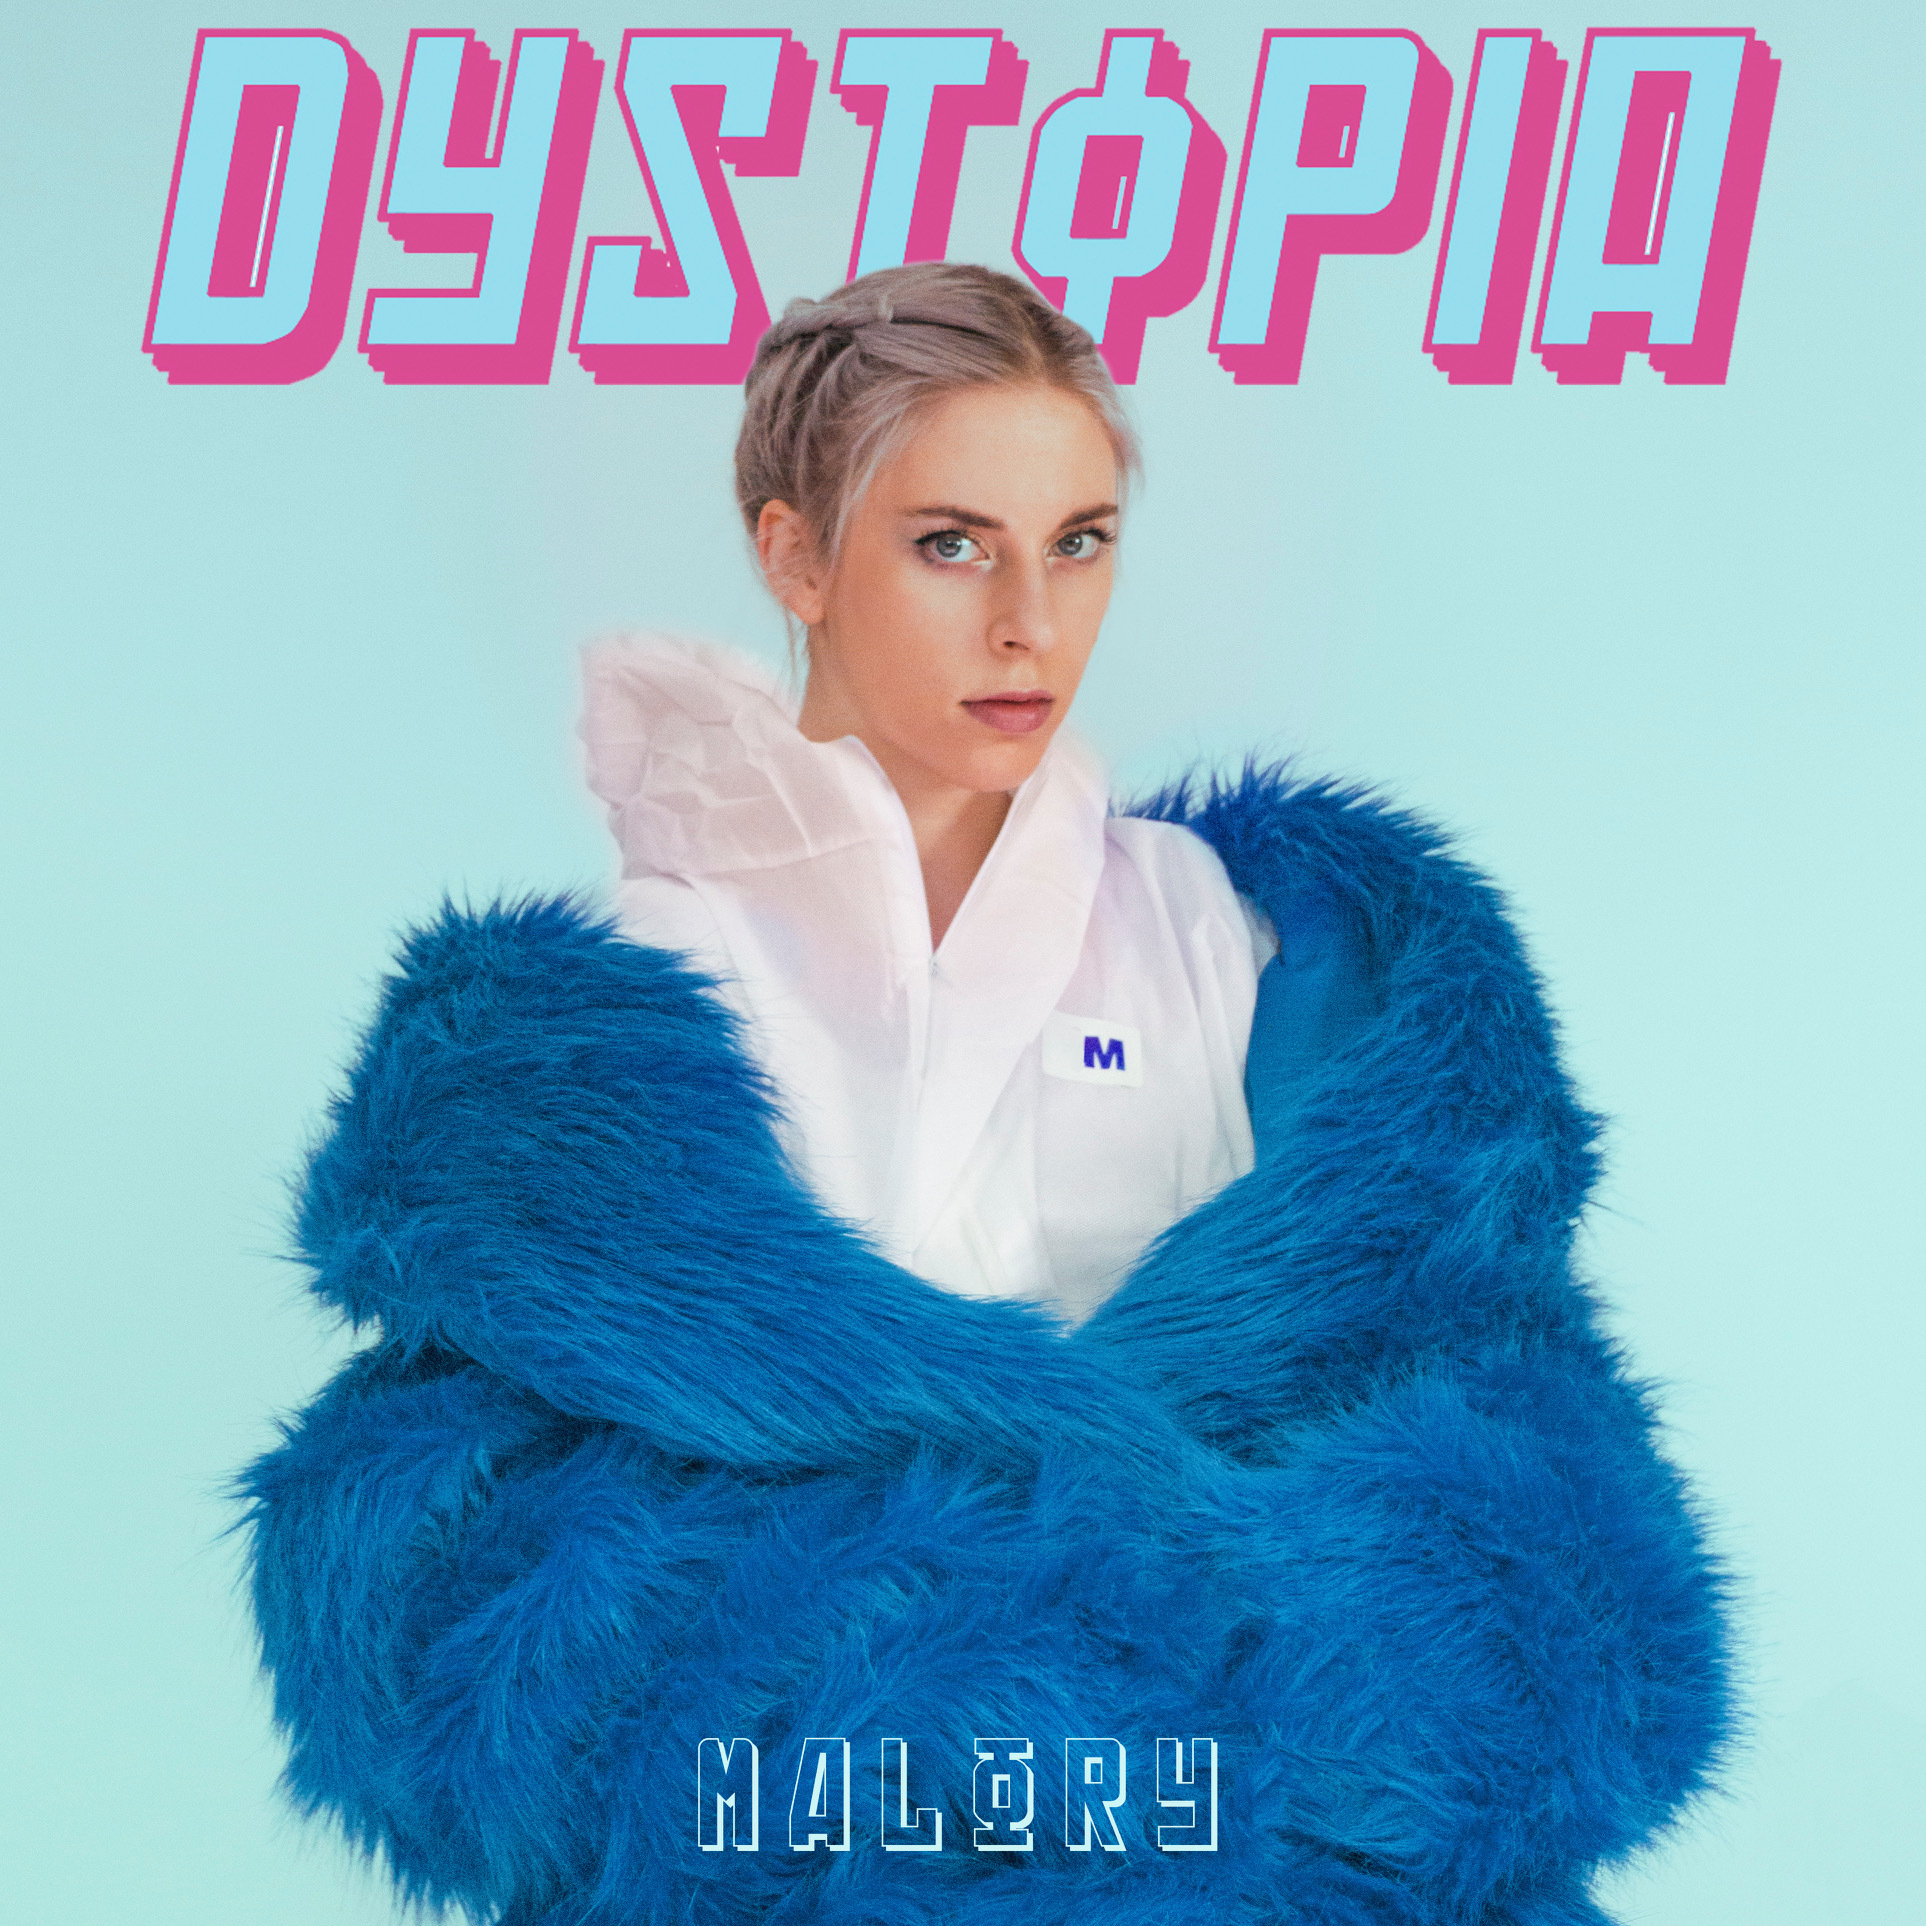 Malory posing in a blue fluffy coat with the album title "Dystopia" in the background in big pink capital letter